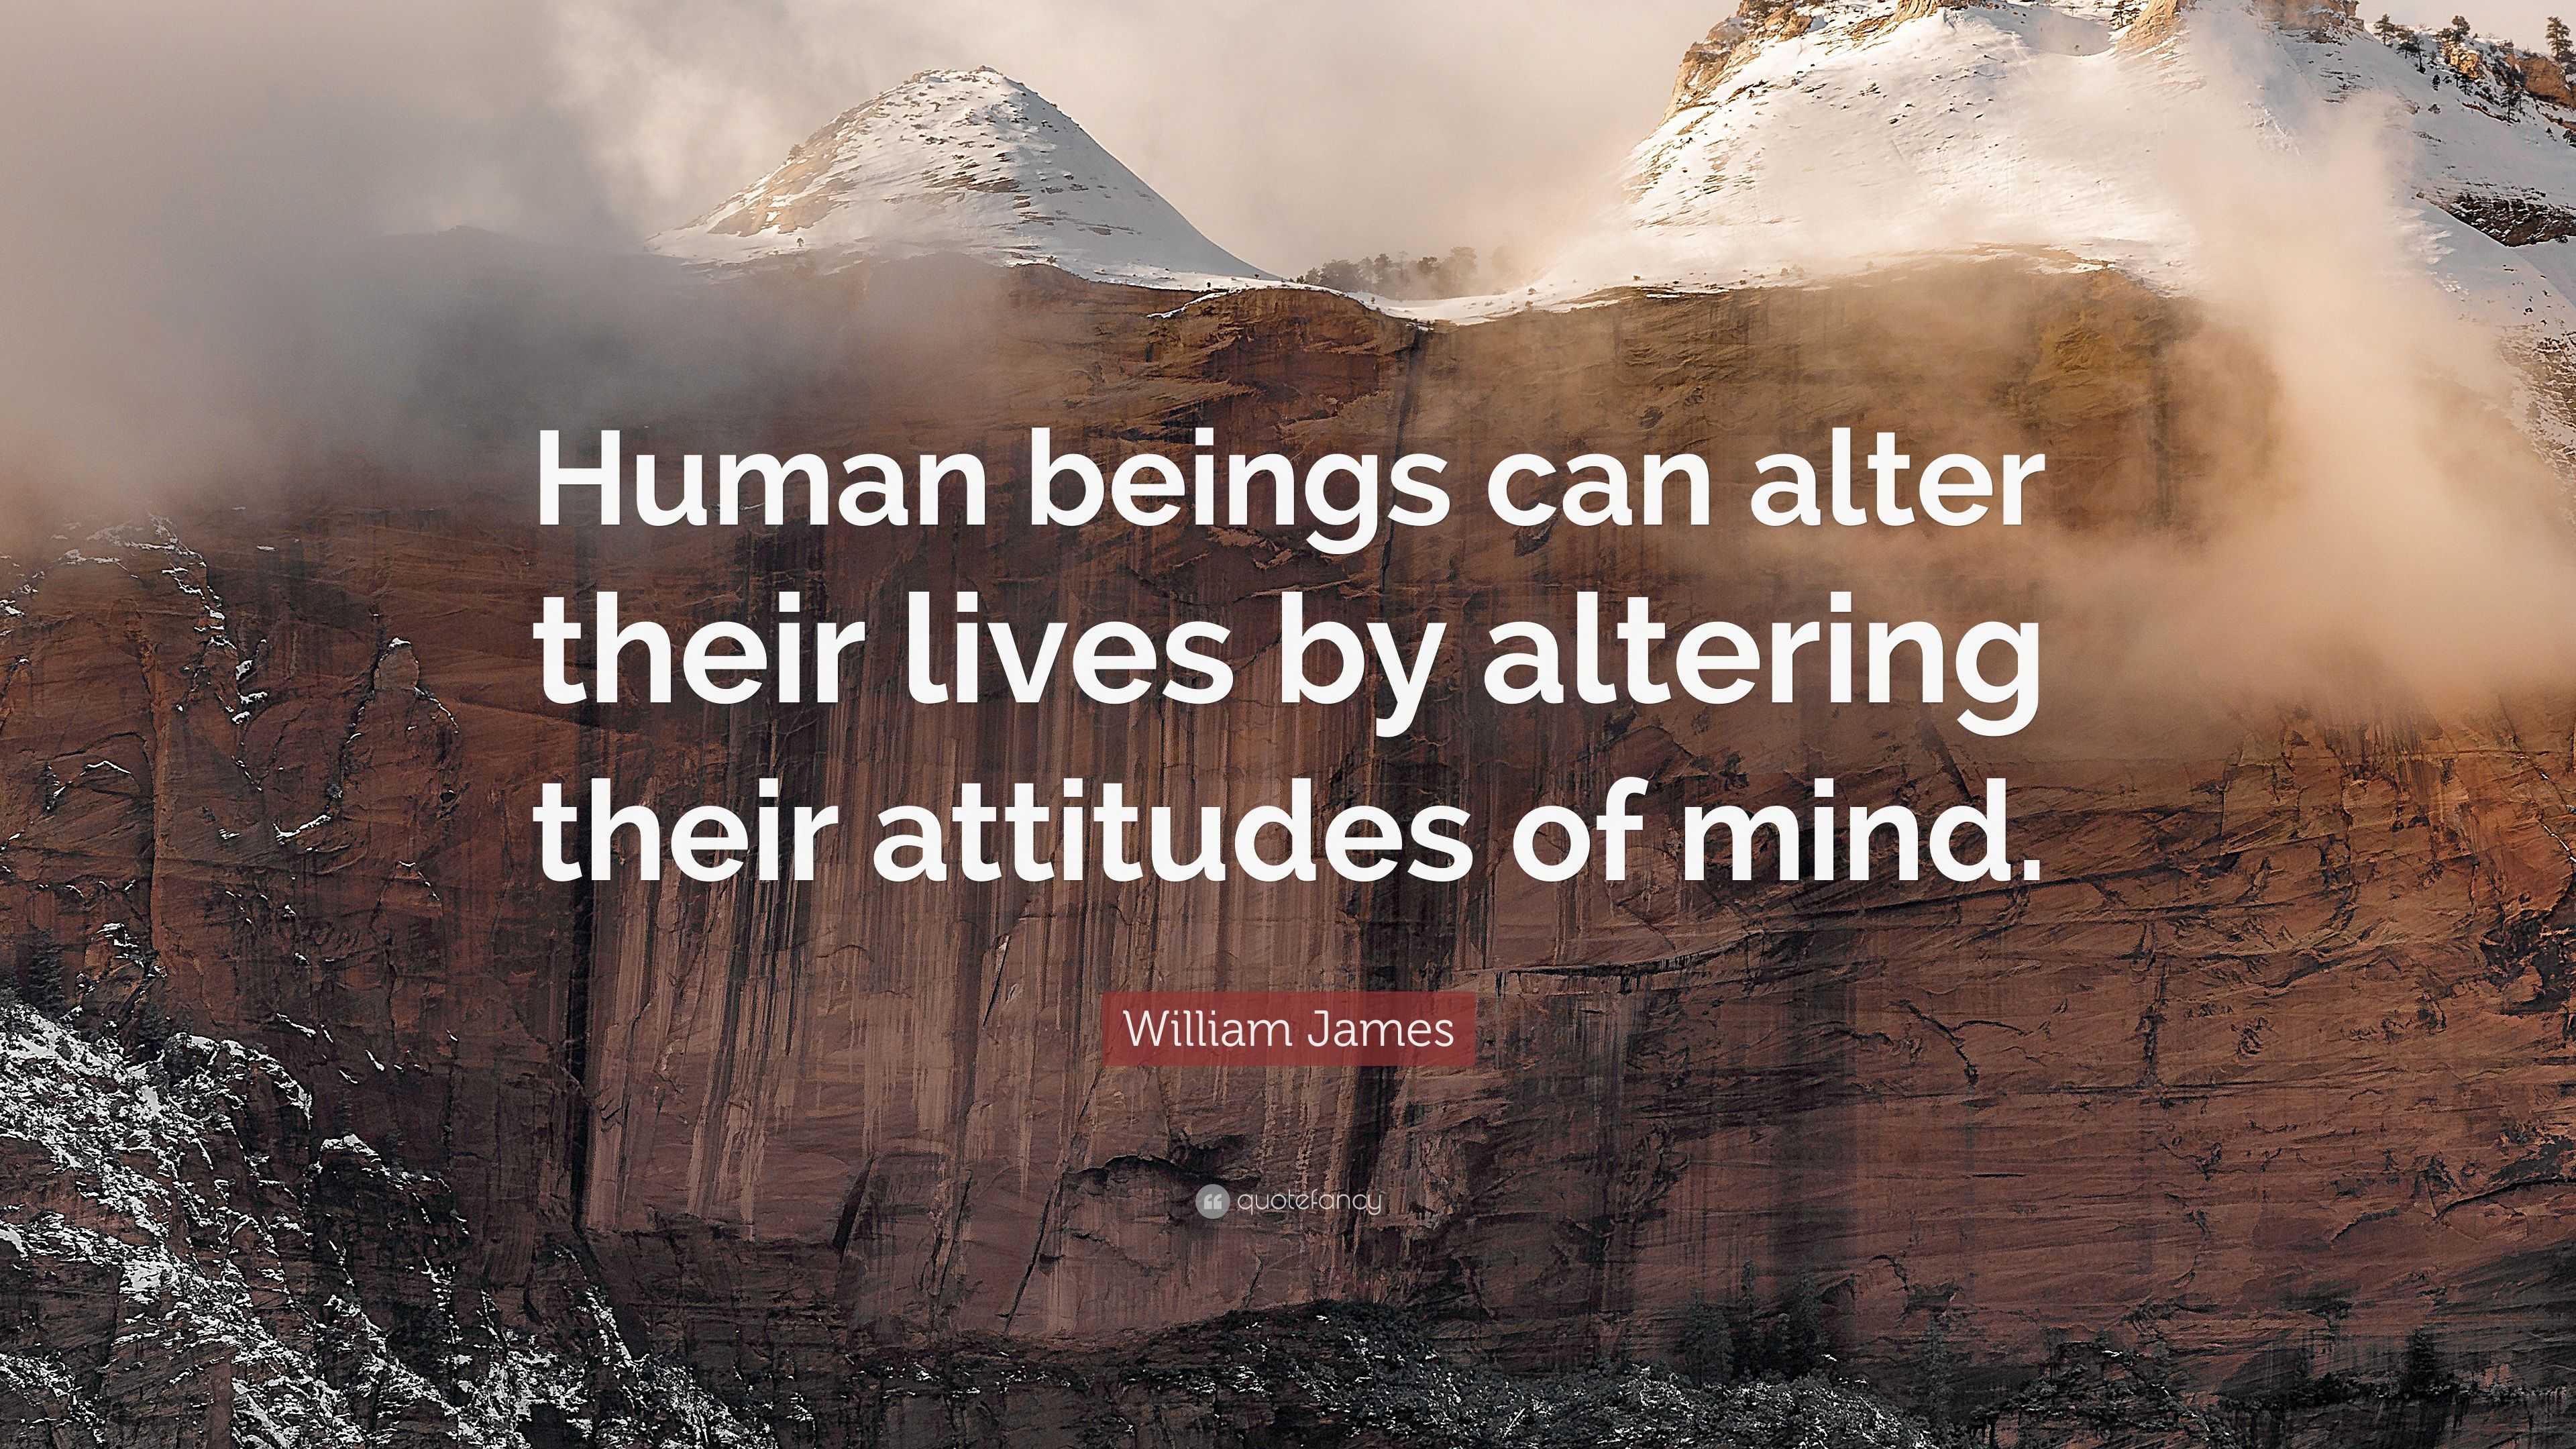 William James Quote: “Human beings can alter their lives by altering